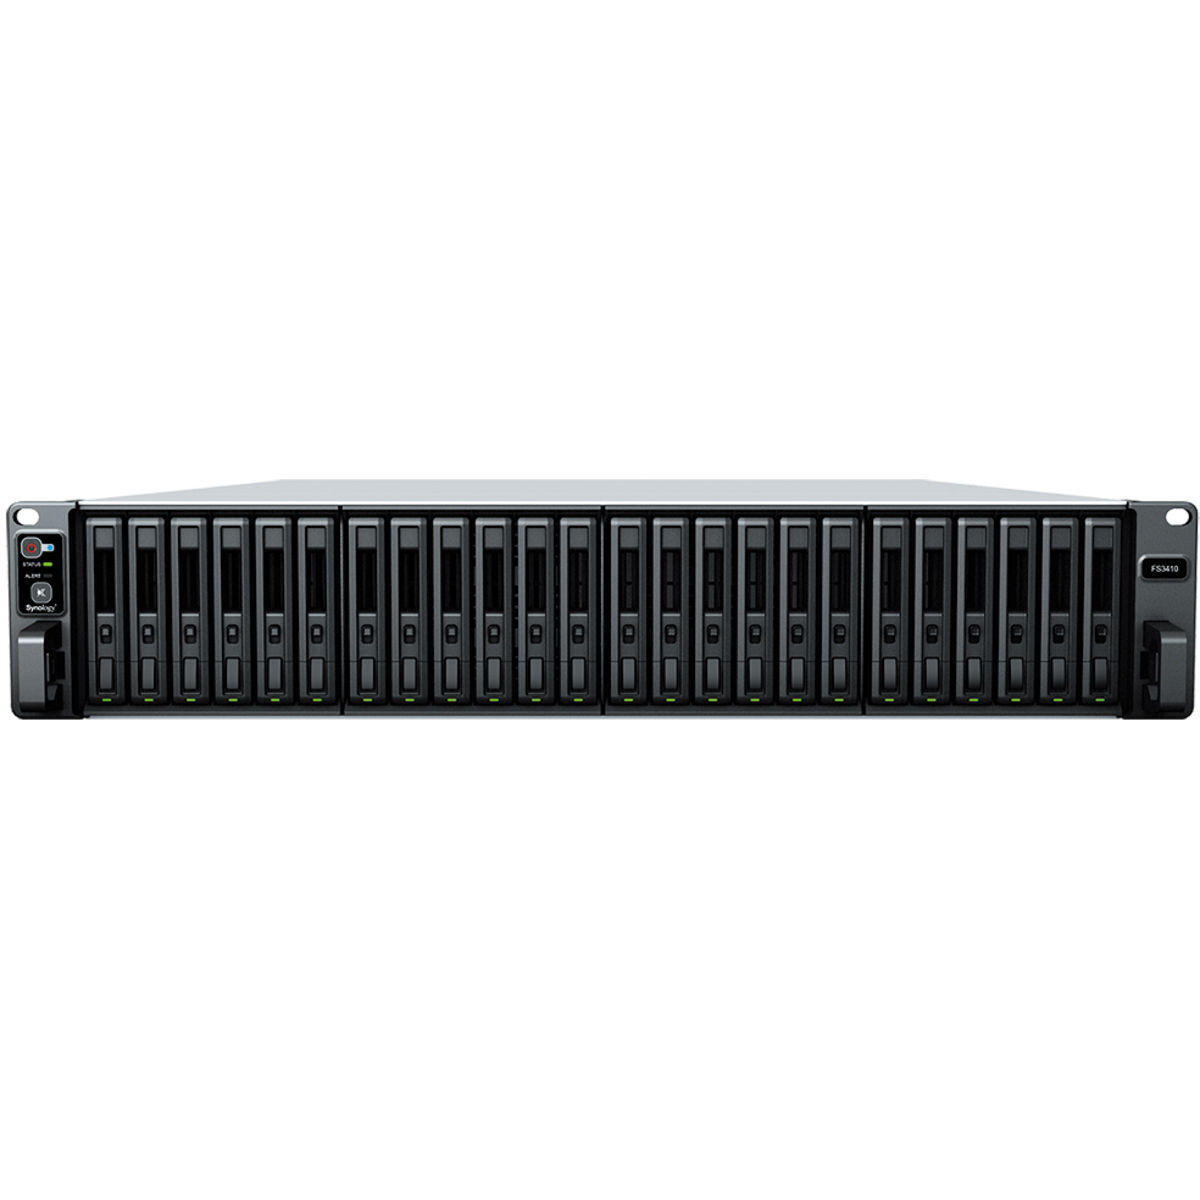 Synology FlashStation FS3410 46tb 24-Bay RackMount Large Business / Enterprise NAS - Network Attached Storage Device 23x2tb Samsung 870 EVO MZ-77E2T0BAM 2.5 560/530MB/s SATA 6Gb/s SSD CONSUMER Class Drives Installed - Burn-In Tested FlashStation FS3410